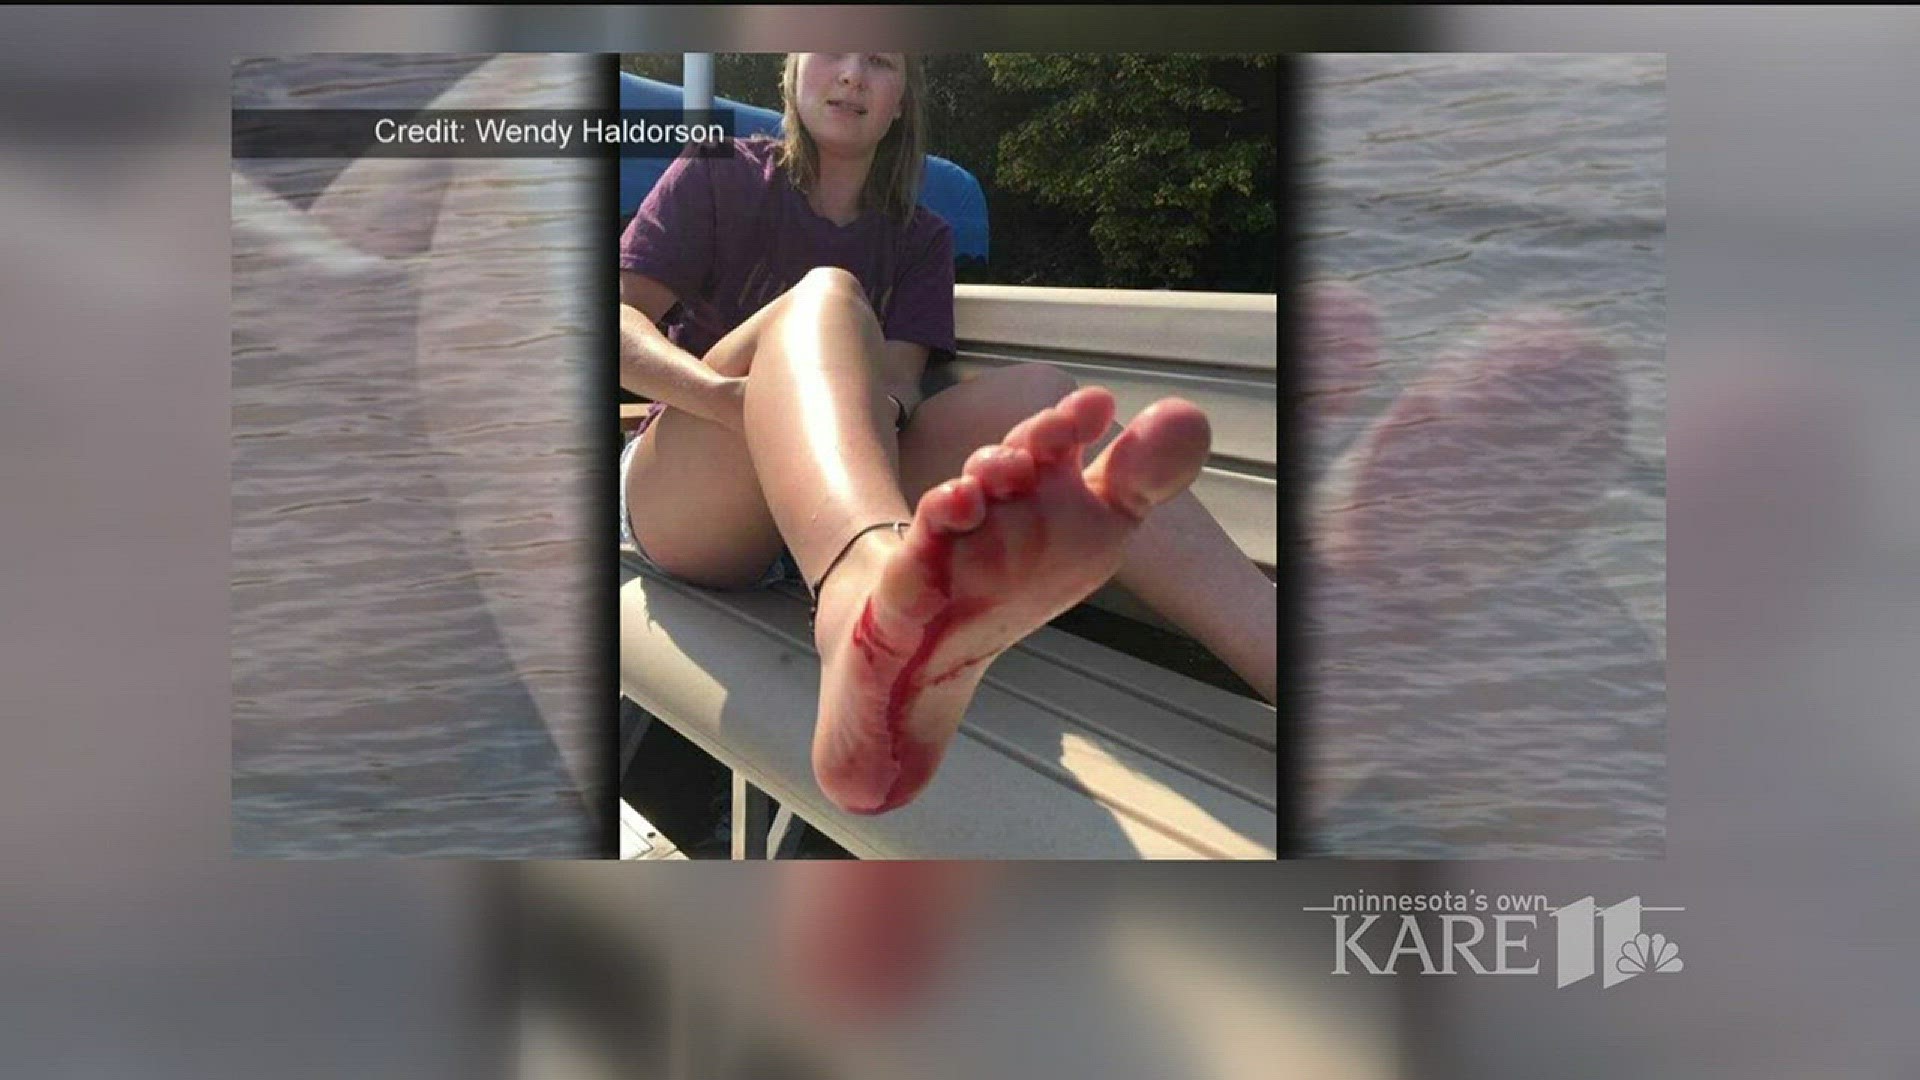 For the second time in less than two months, a muskie has attacked someone on the same northern Minnesota lake. Twenty-two-year-old Paige Dougherty's foot was bitten Sunday afternoon on Island Lake, while she was dangling her feet in the water. http://kar